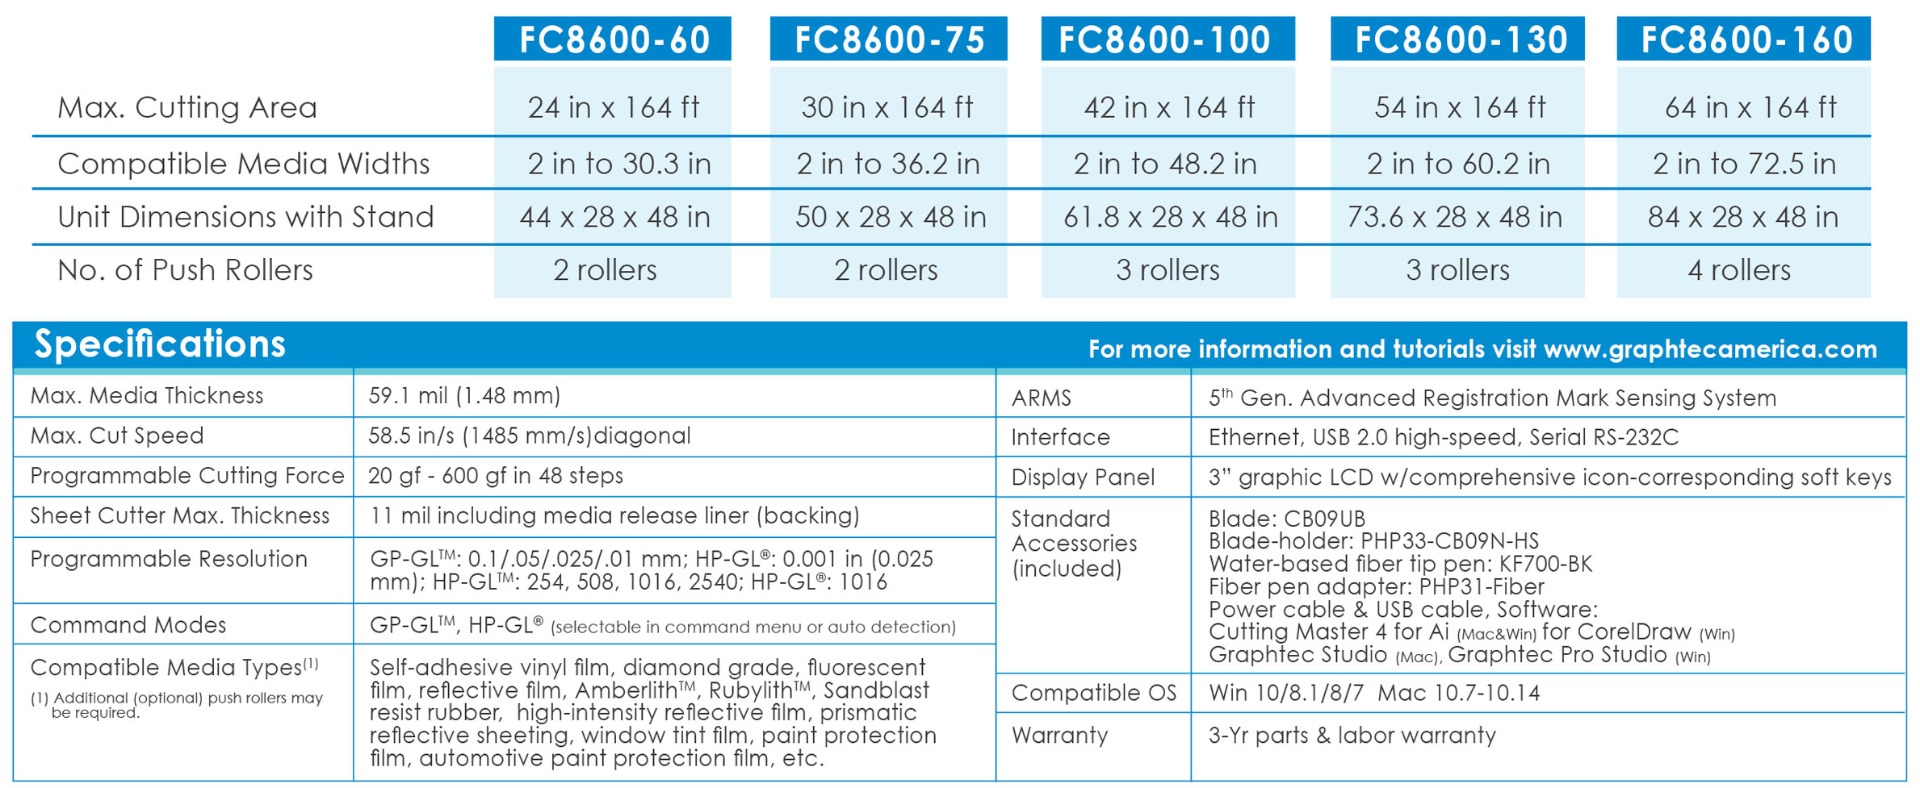 graphtec fc8600 64-inch cutter specs and comparison to fc8600-60 75 100 and 130